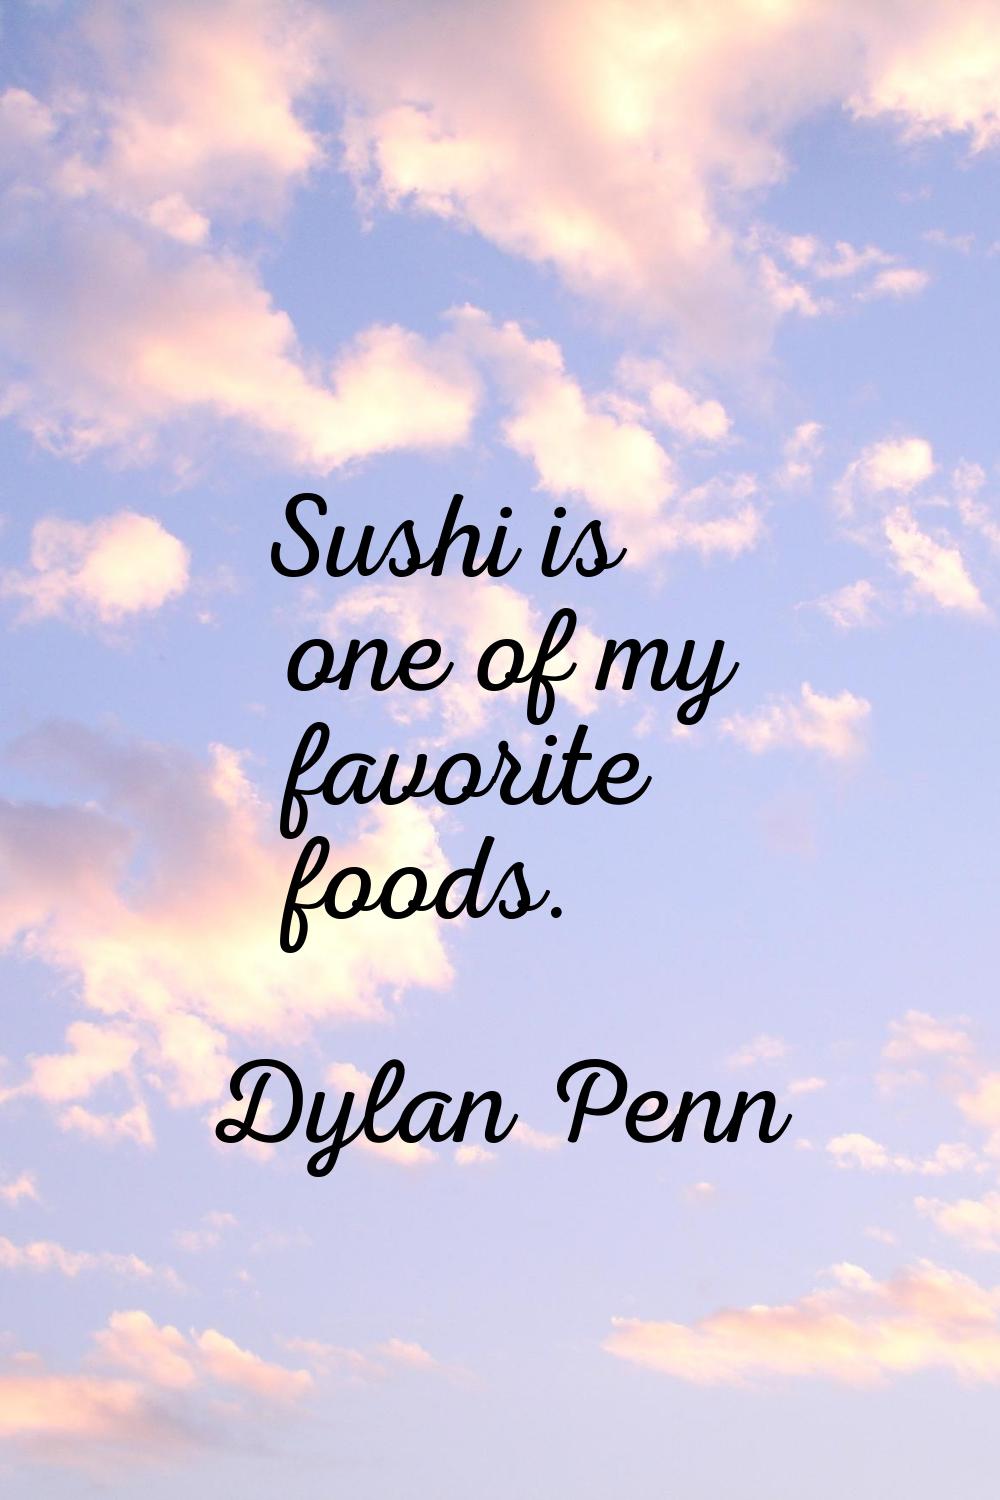 Sushi is one of my favorite foods.